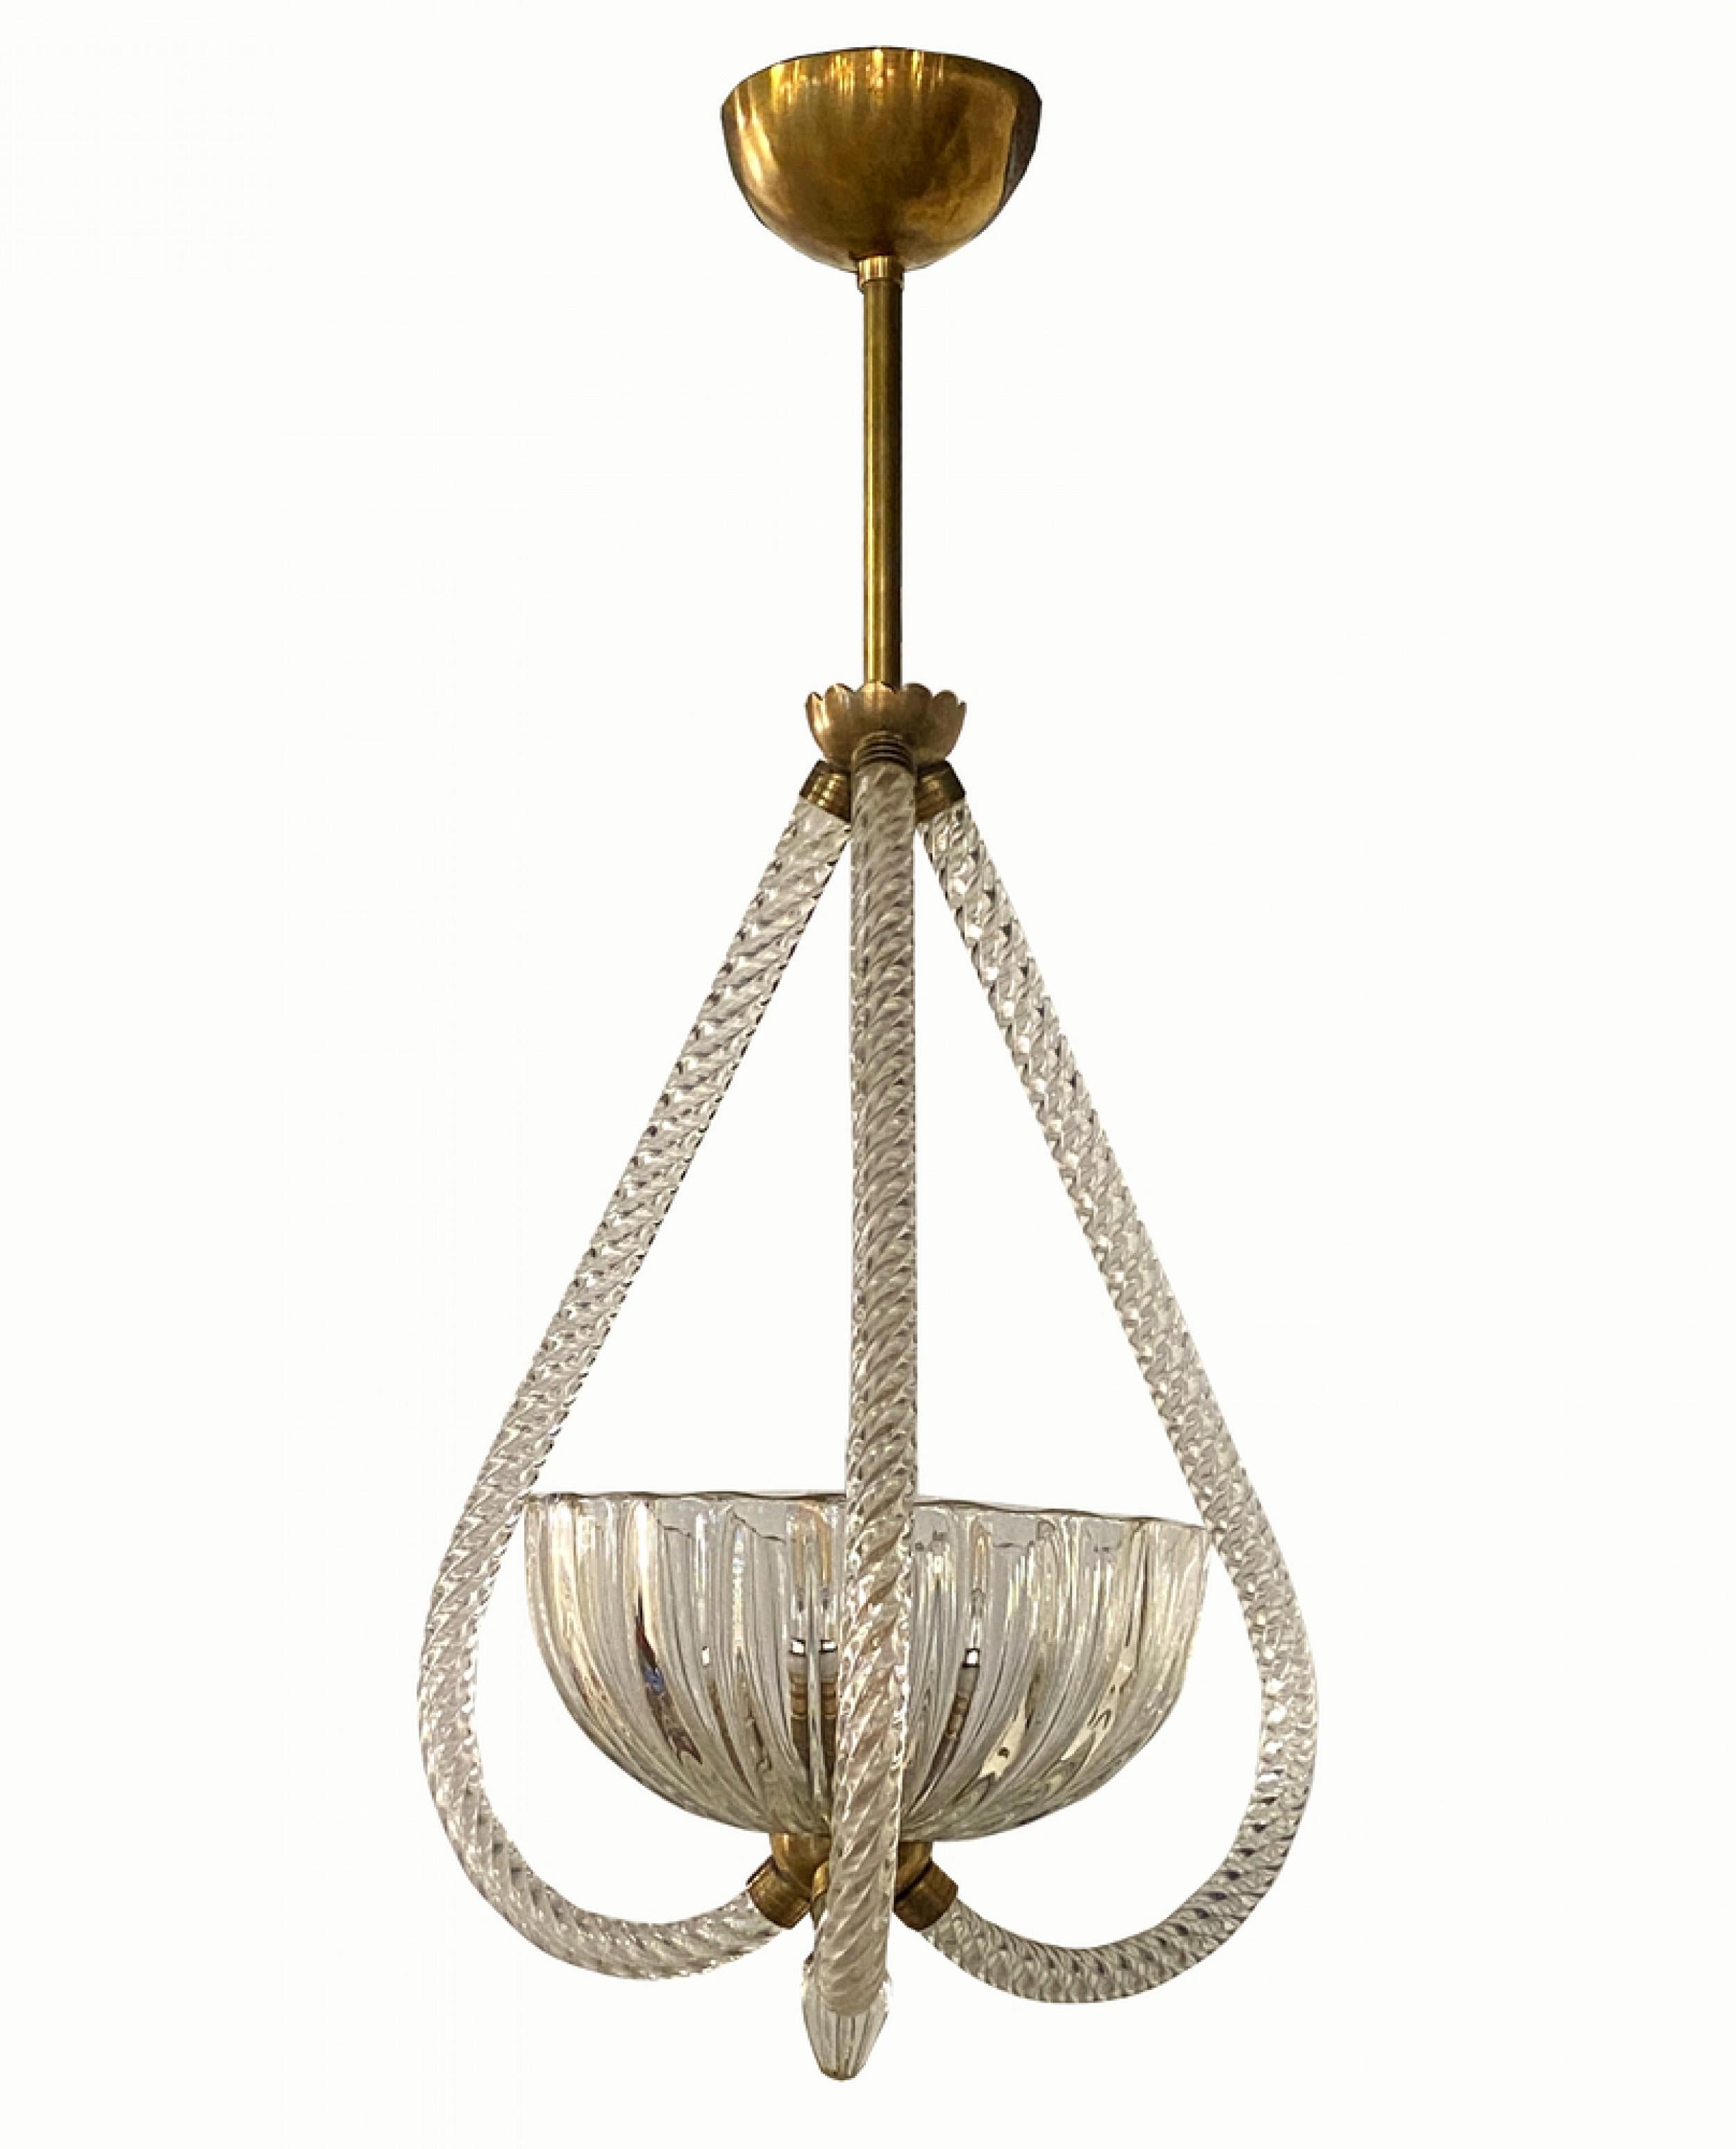 Midcentury Italian Modern chandelier with a central clear glass bowl with three blown glass supports connected to the underside of the central bowl connected to a brass fixture. (SEGUSO).